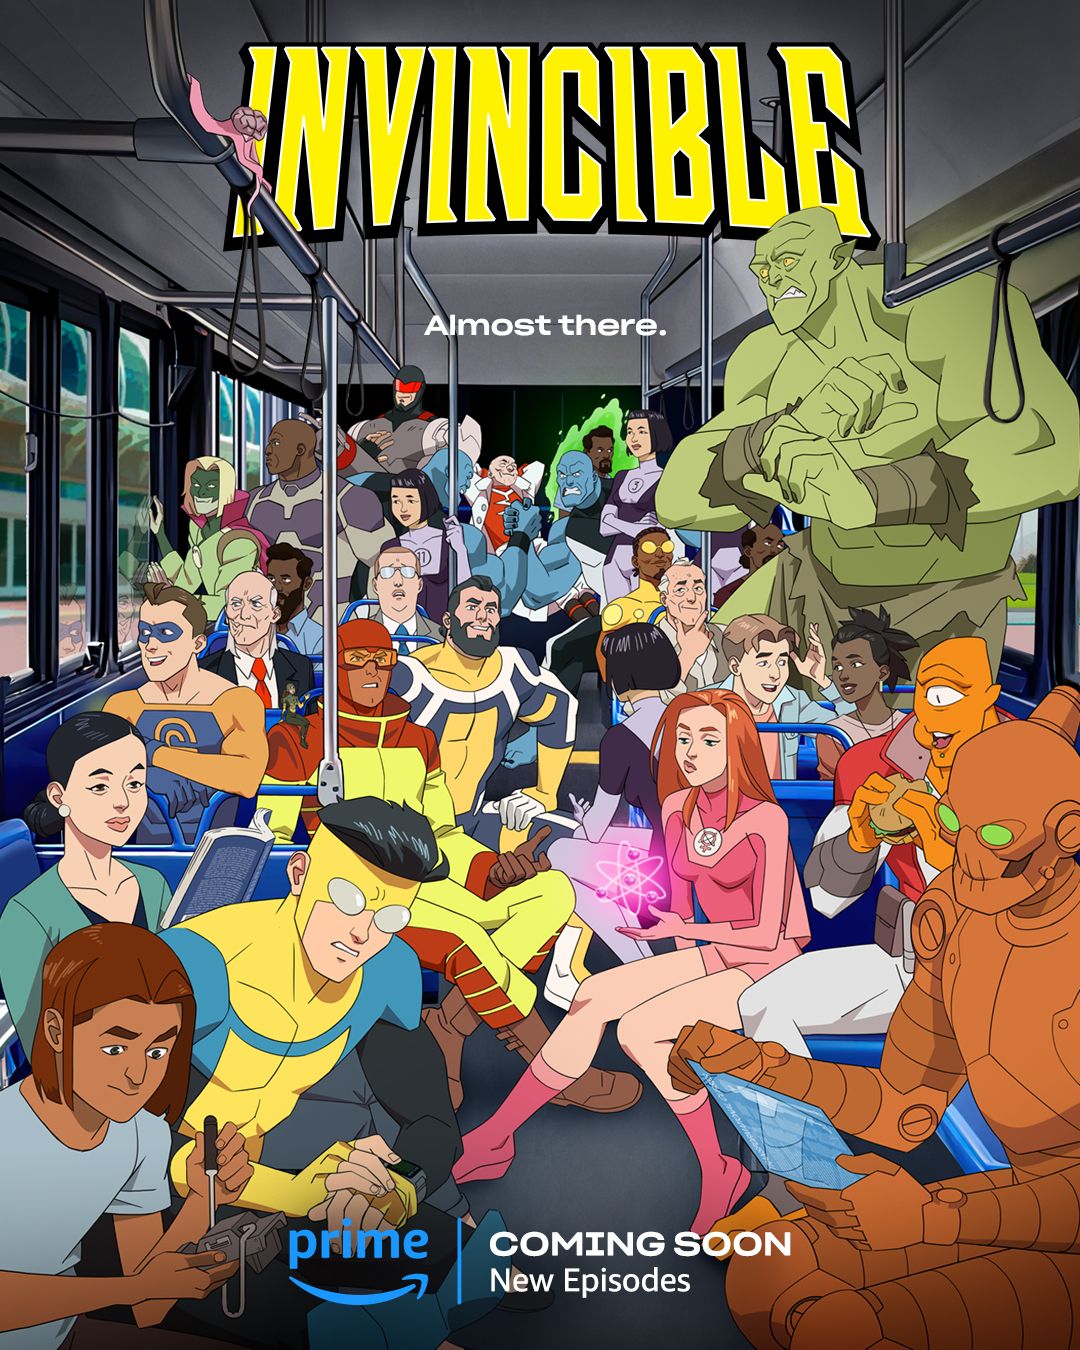 Invincible season 2: Every difference between the comic and the show (S2E4)